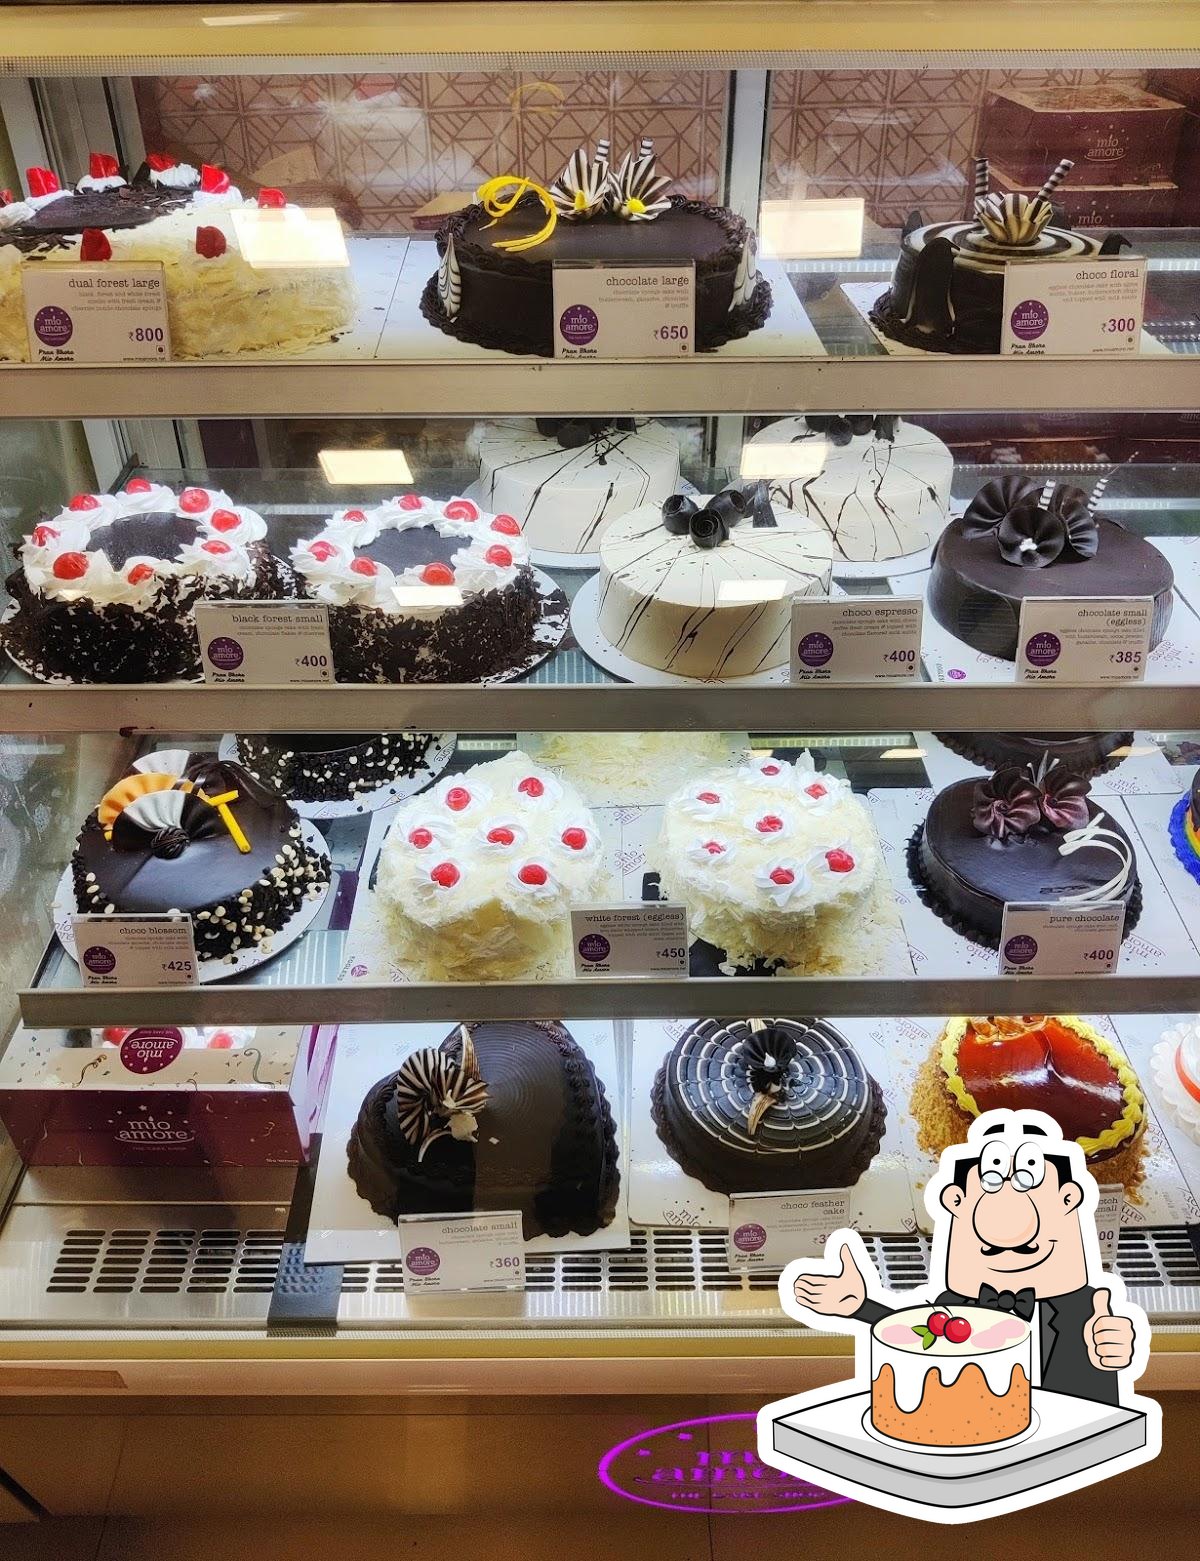 Mio Amore - The Cake Shop (@mioamore_bakery) • Instagram photos and videos